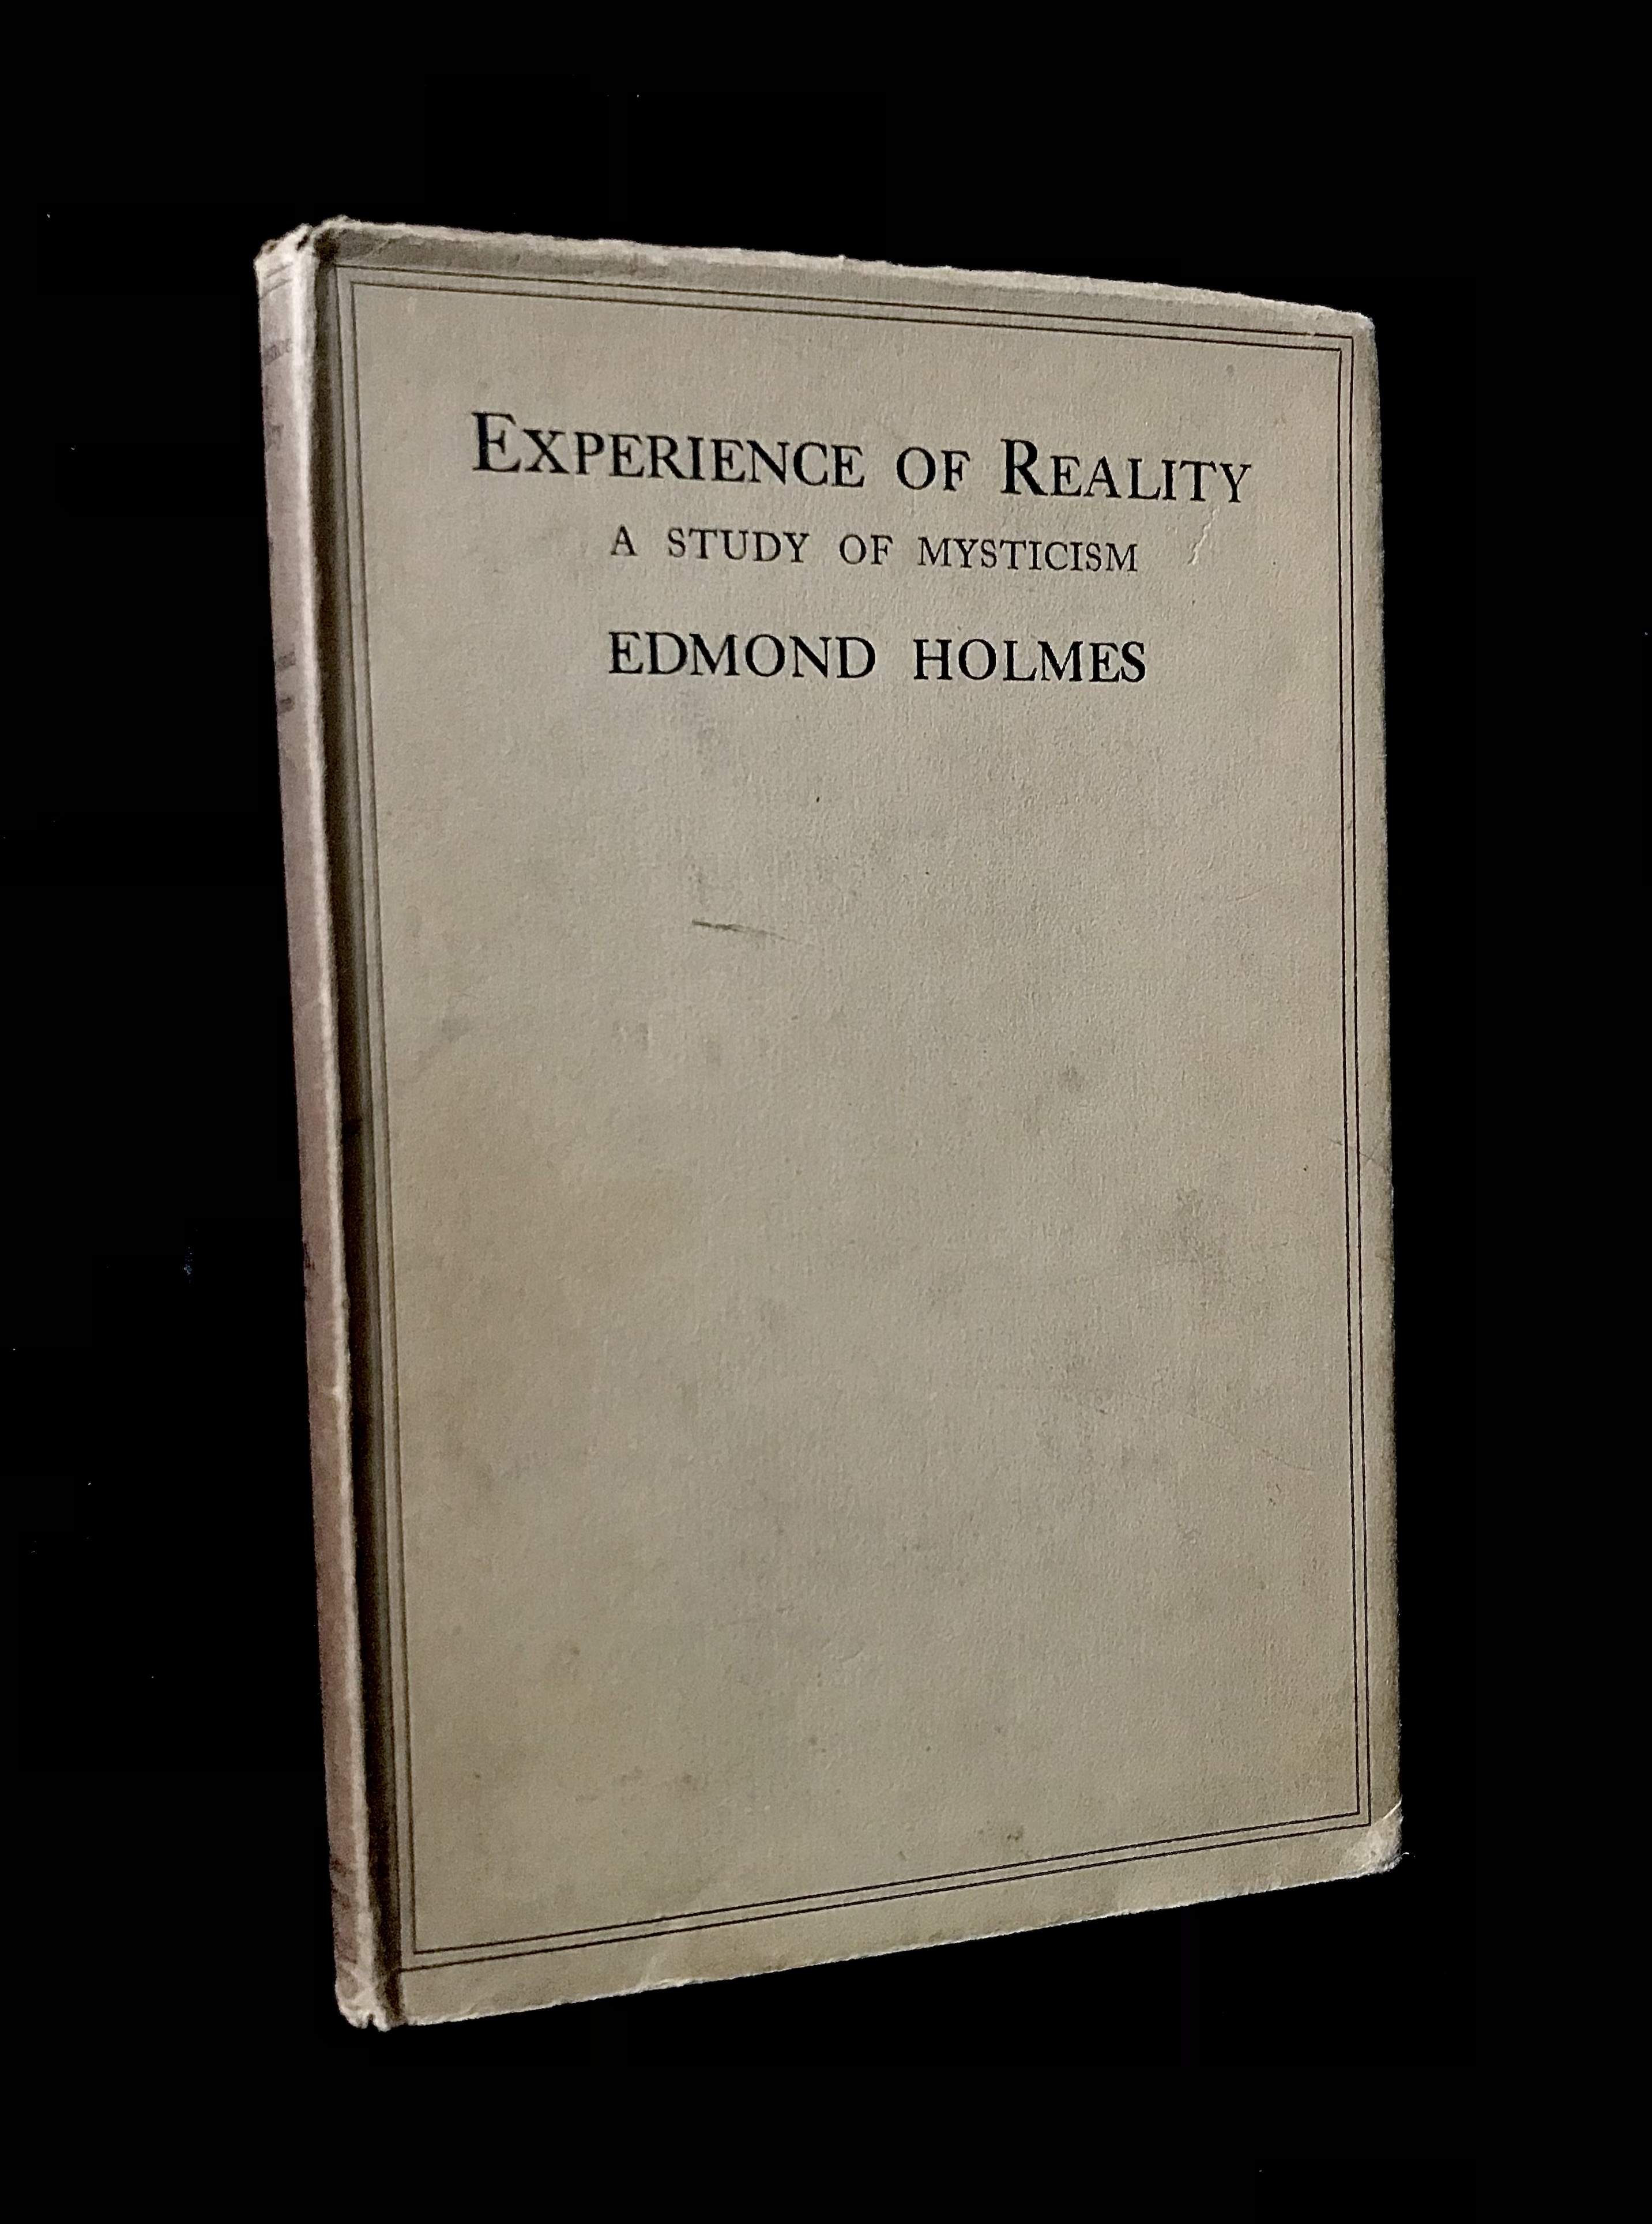 Experience of Reality: A Study of Mysticism by Edmond Holmes